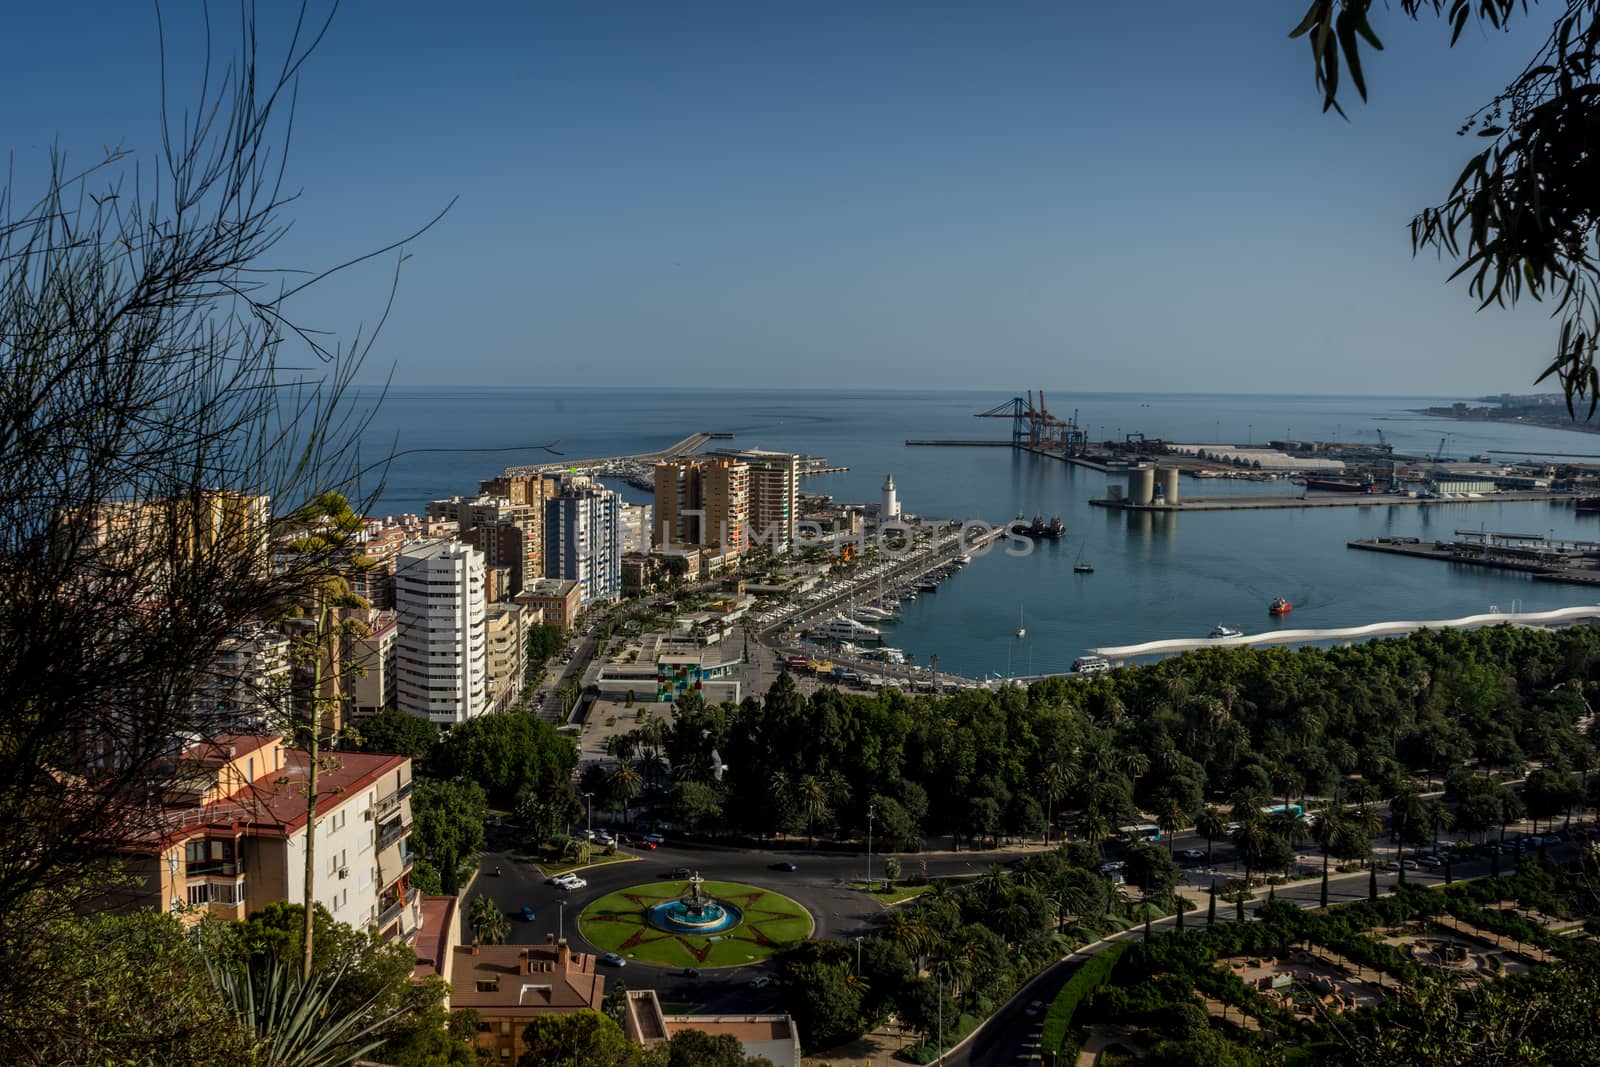 aerial view of Malagueta district and La Malagueta Harbour in Malaga, Spain, Europe on a bright summer day with blue sky